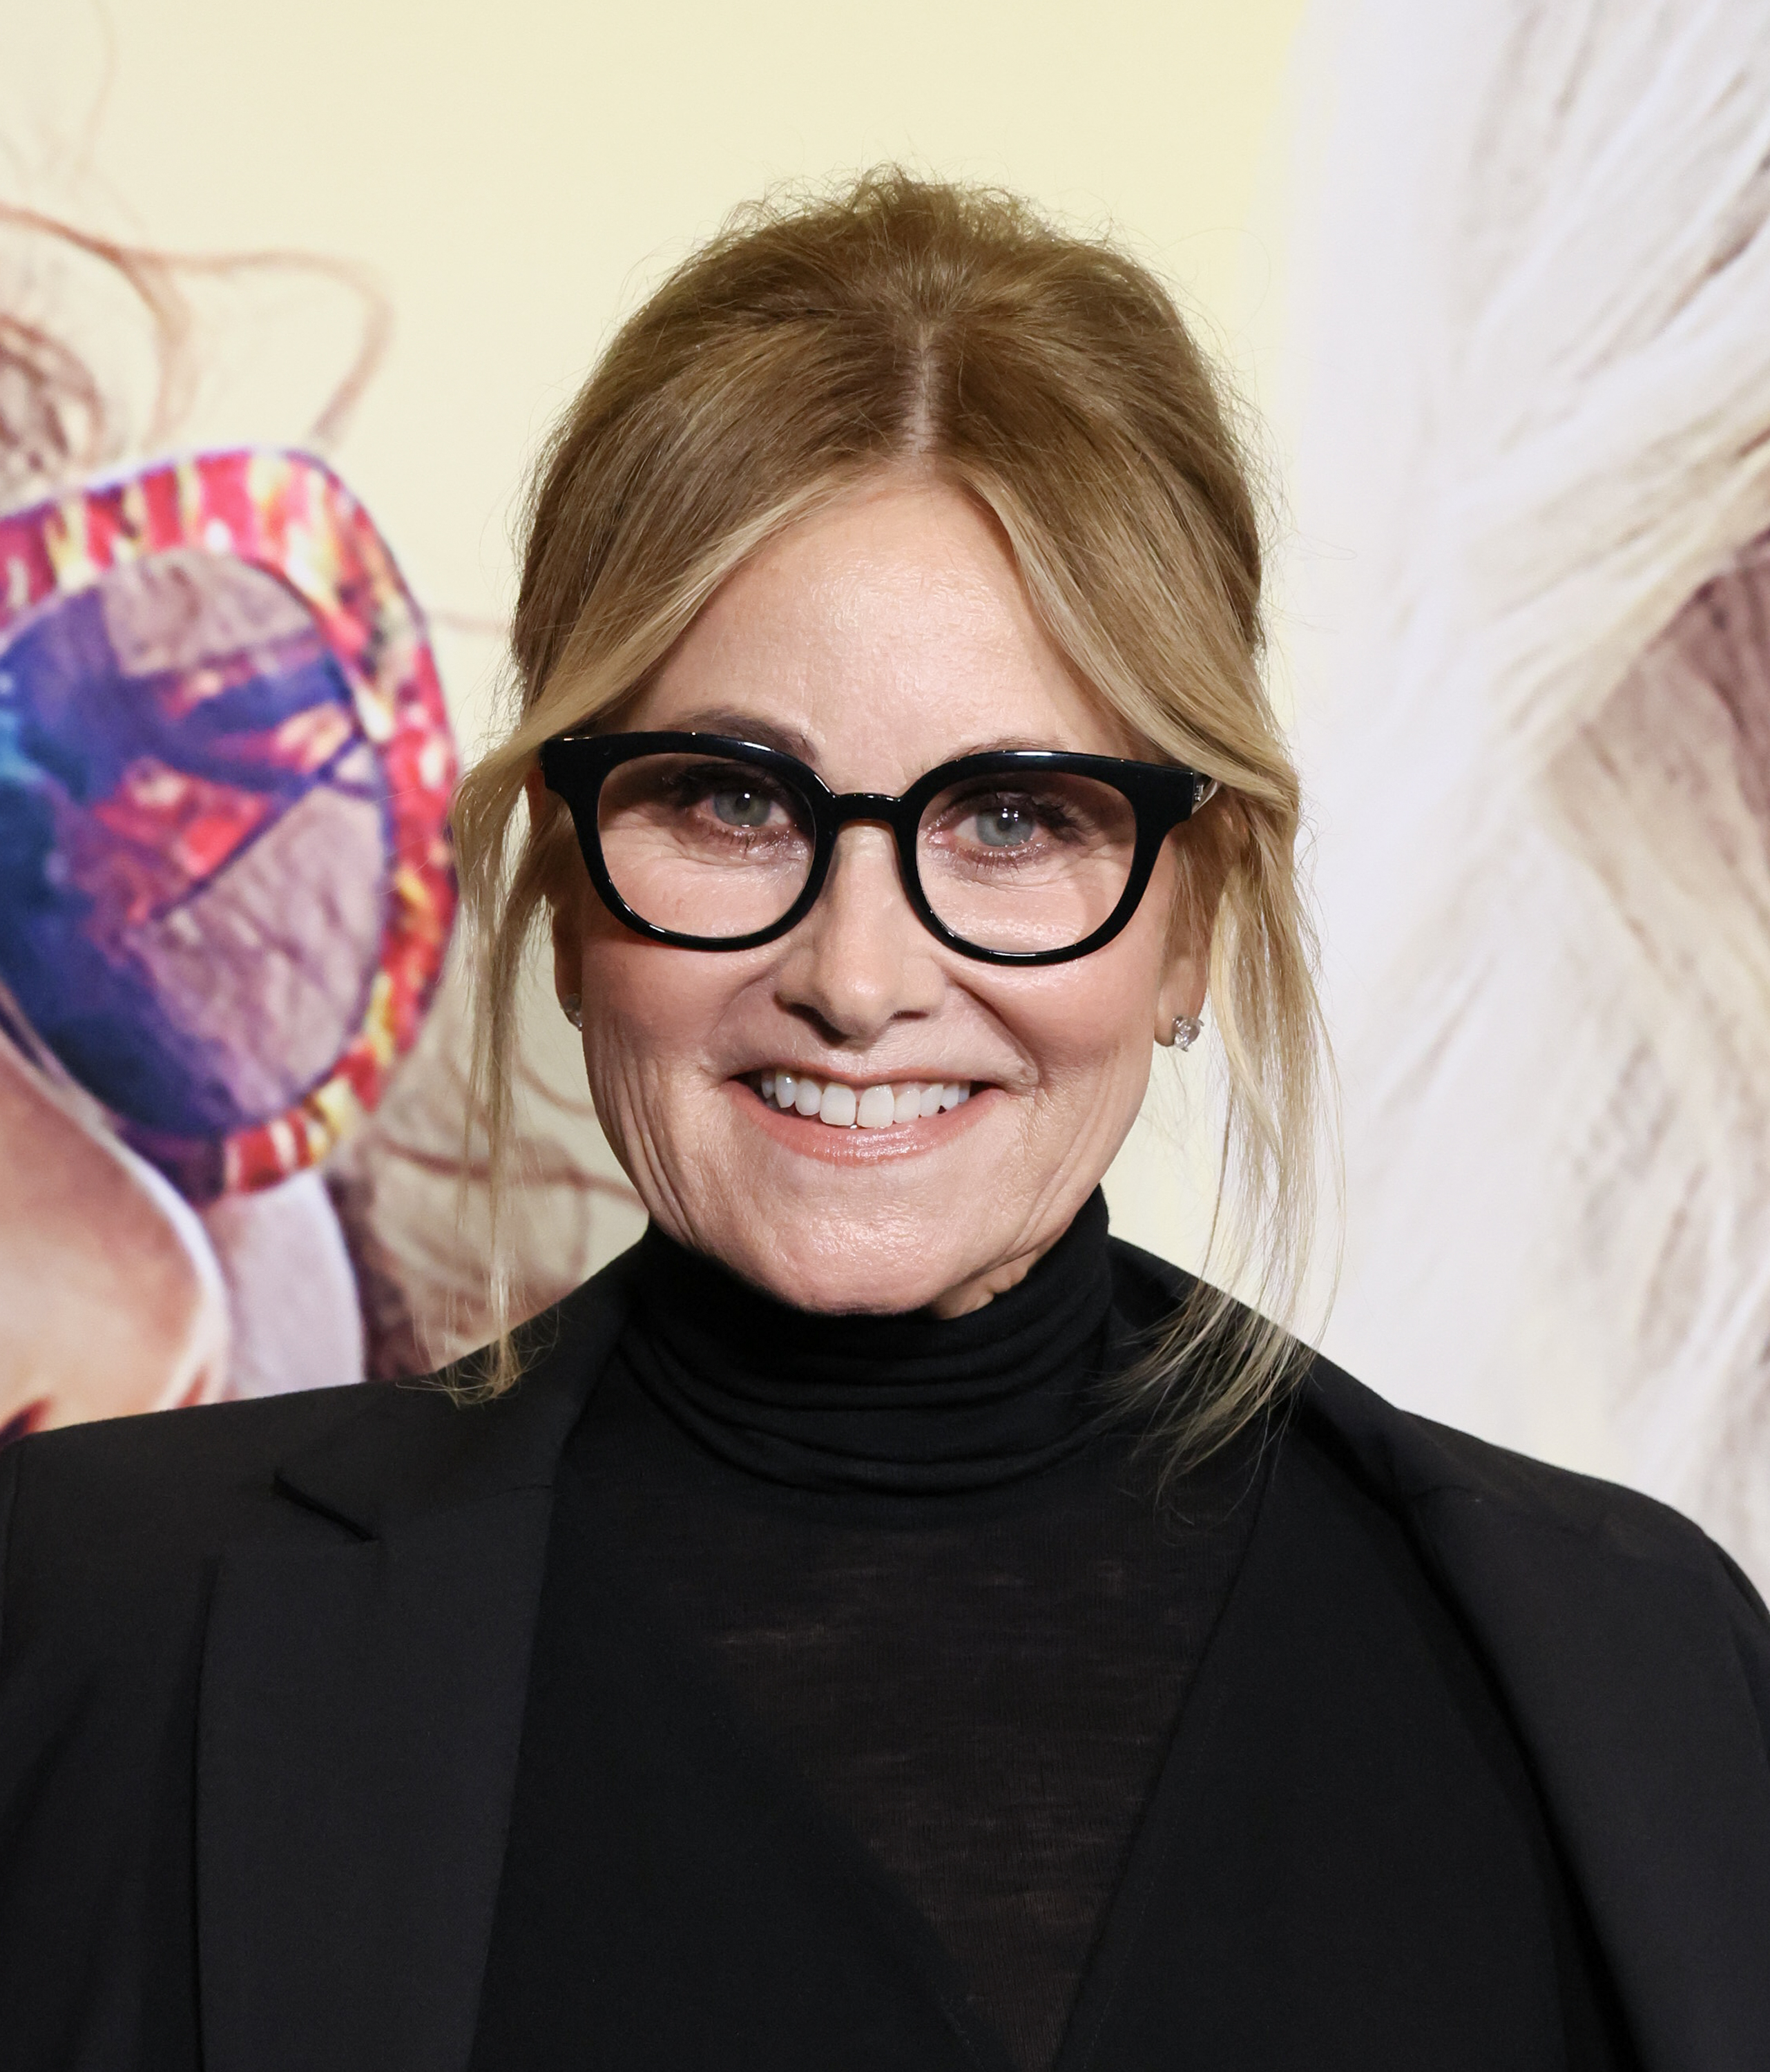 Woman with black glasses and black outfit smiling at an event